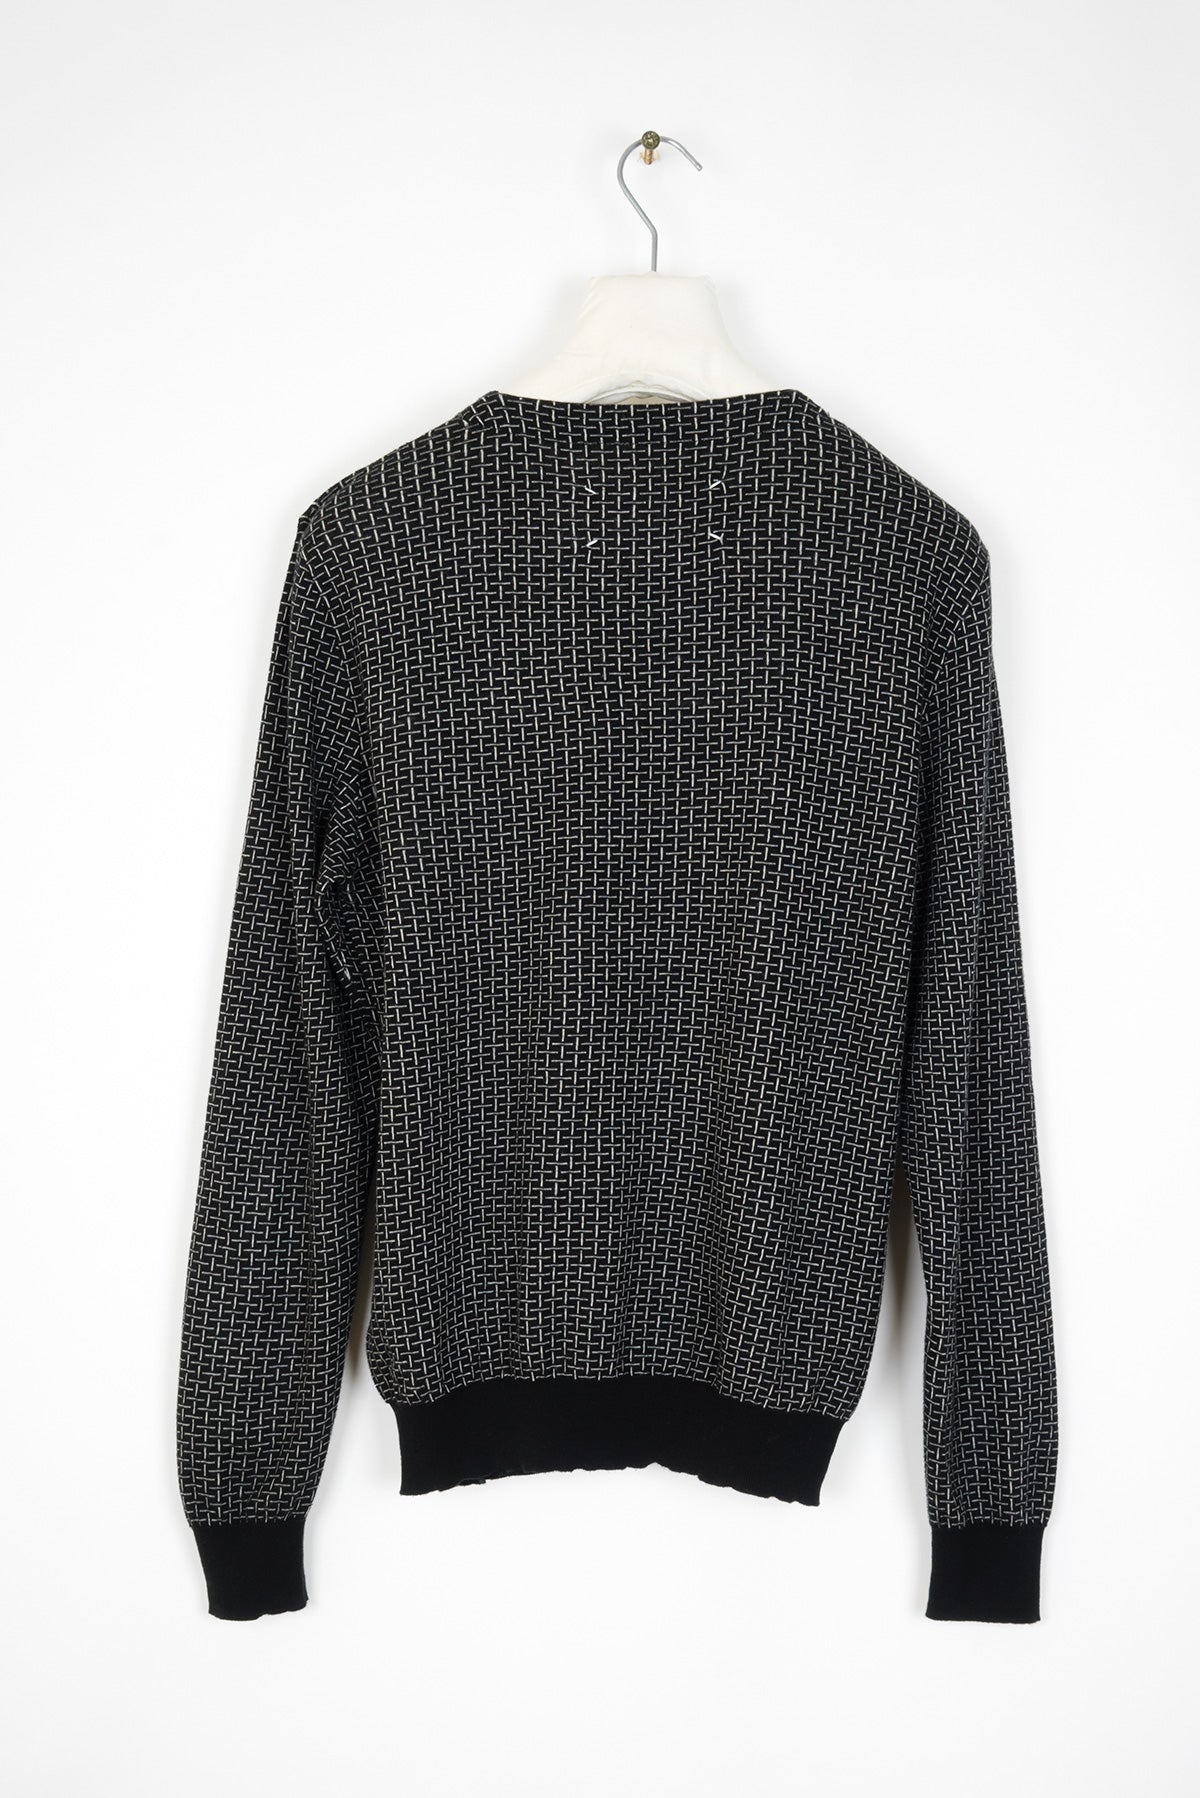 2008 S/S CREWNECK JUMPER WITH NET PATTERN IN BRUSHED COTTON